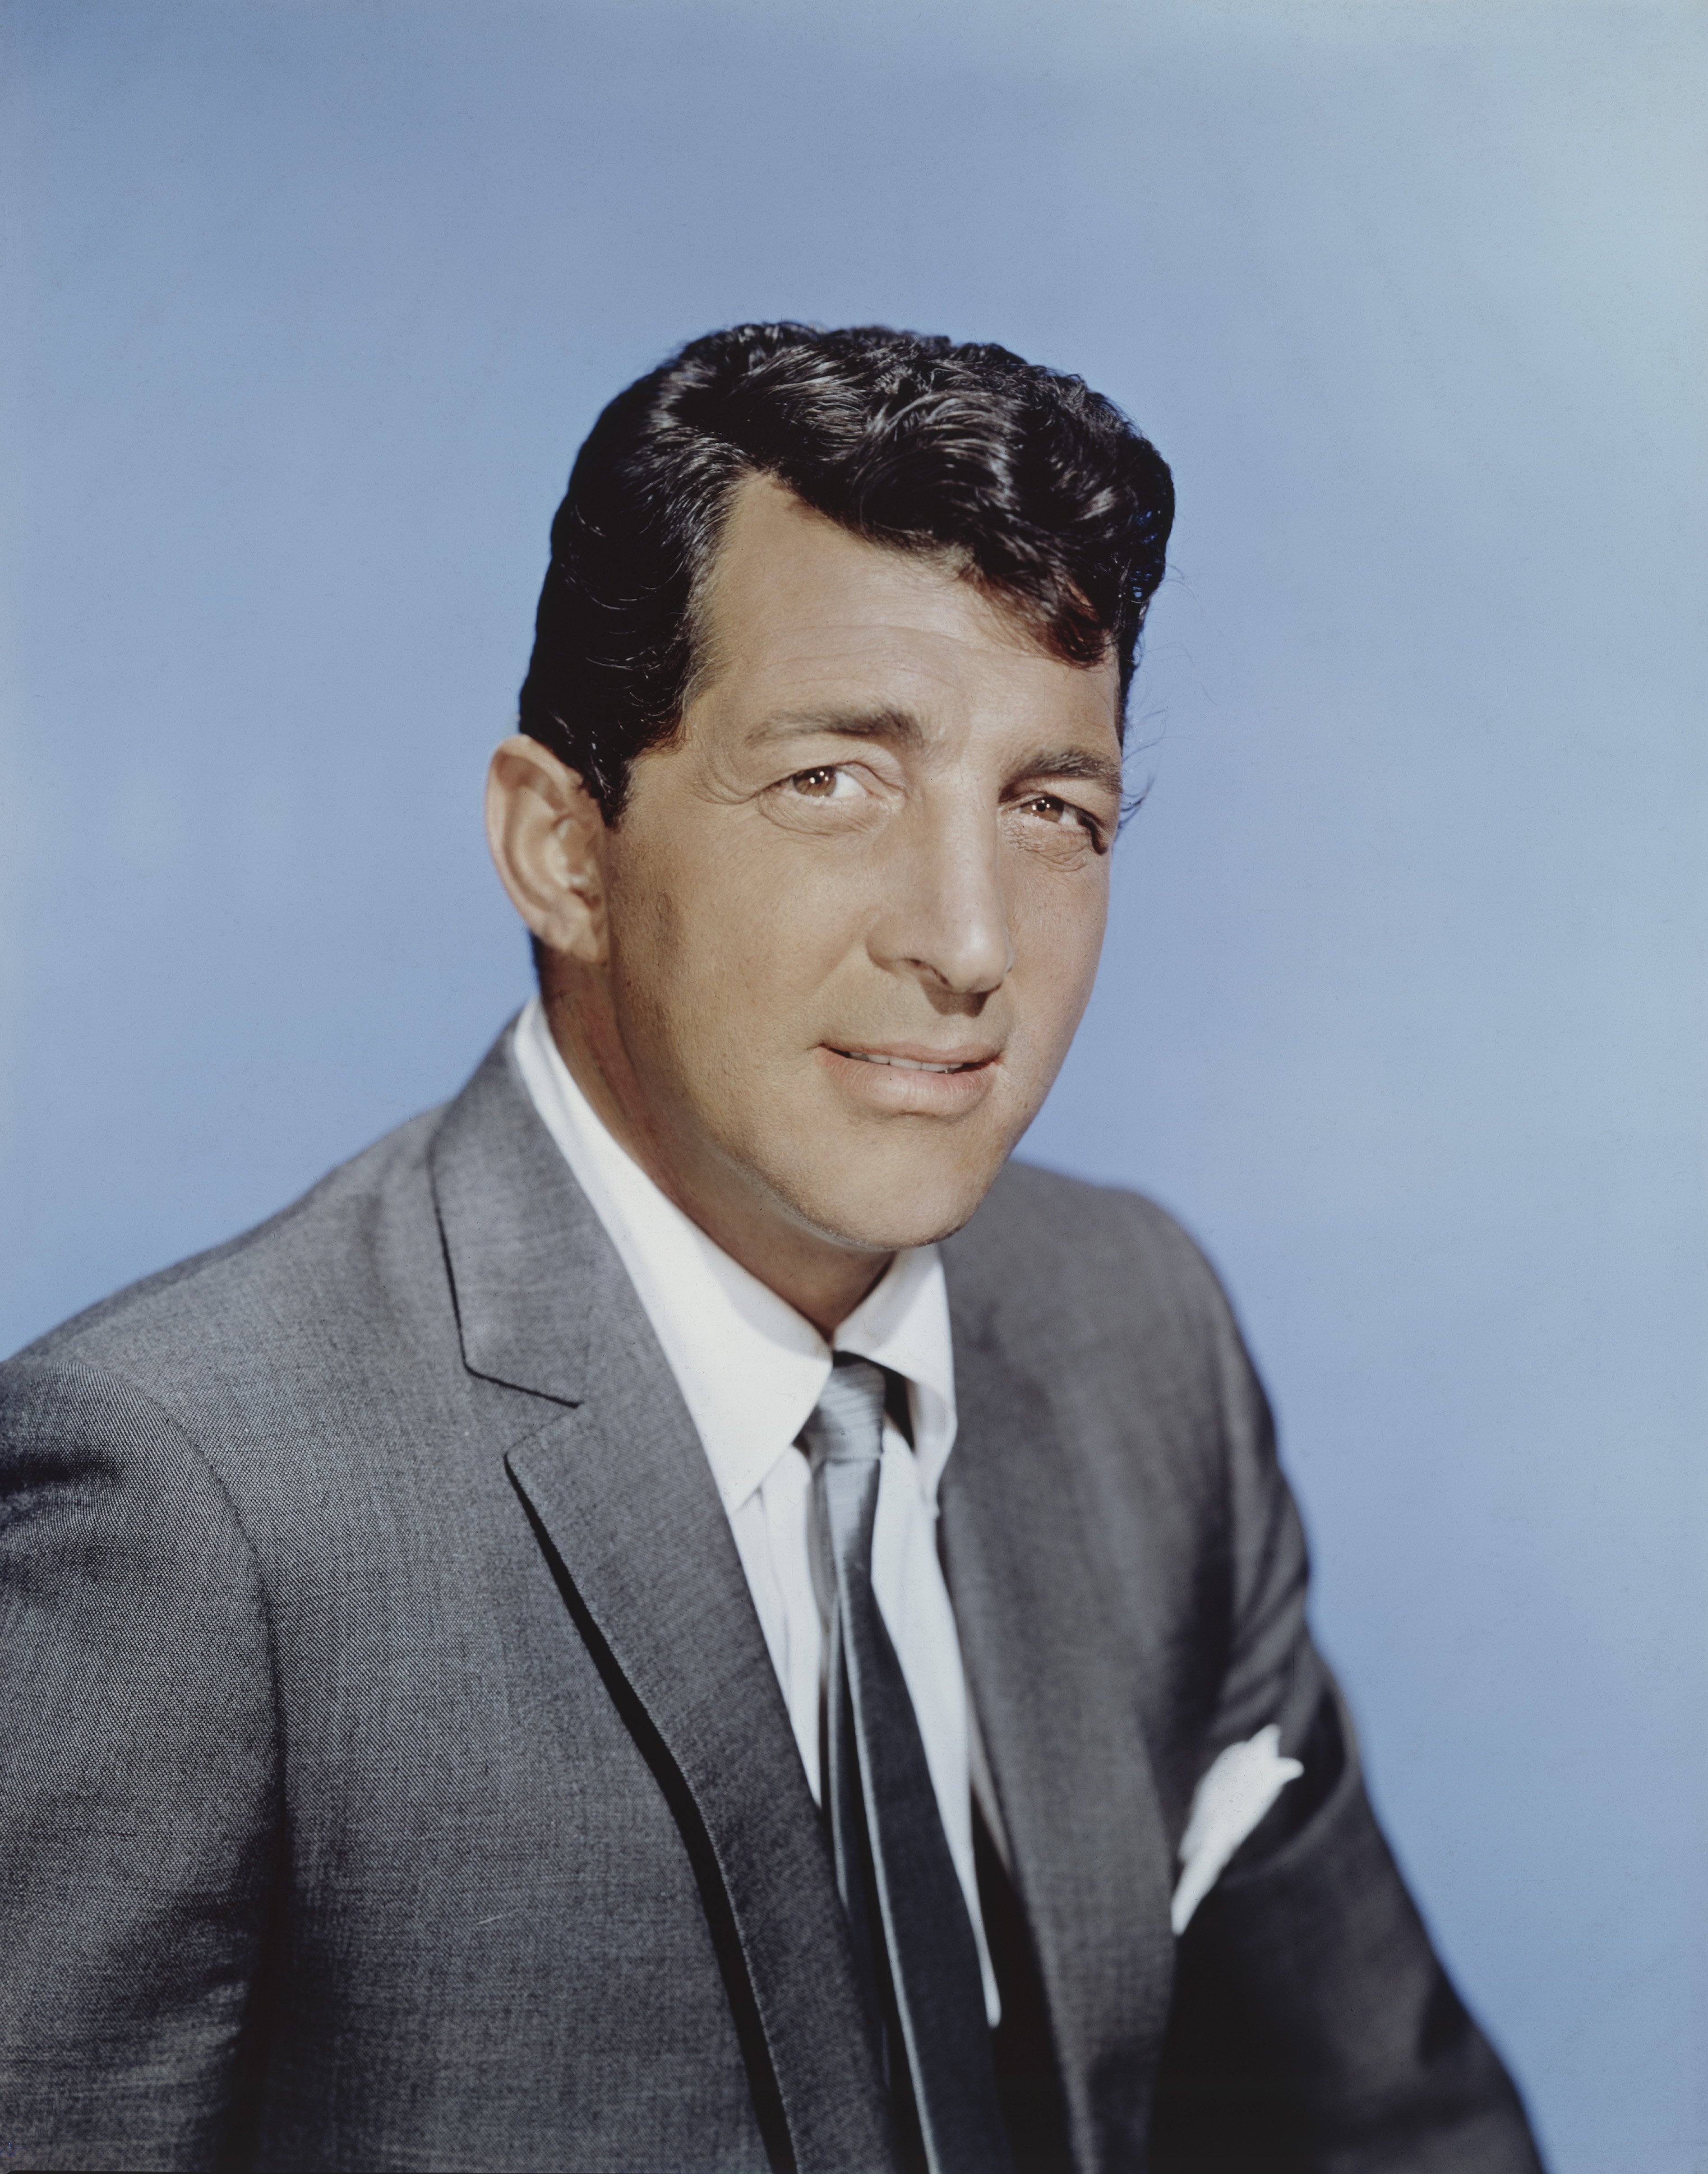 American actor and singer Dean Martin, circa 1960 |Source: Getty Images